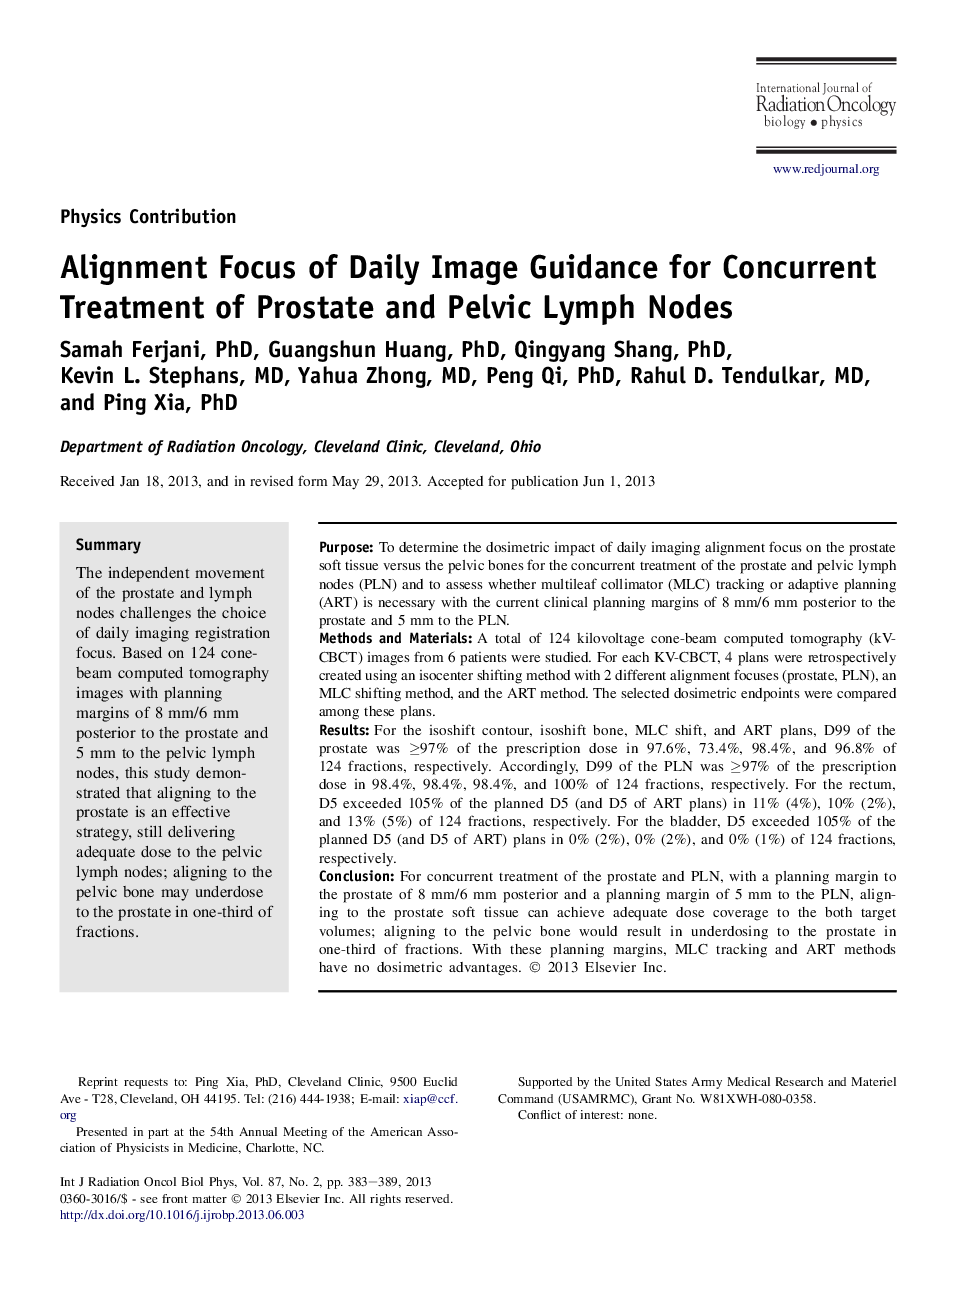 Alignment Focus of Daily Image Guidance for Concurrent Treatment of Prostate and Pelvic Lymph Nodes